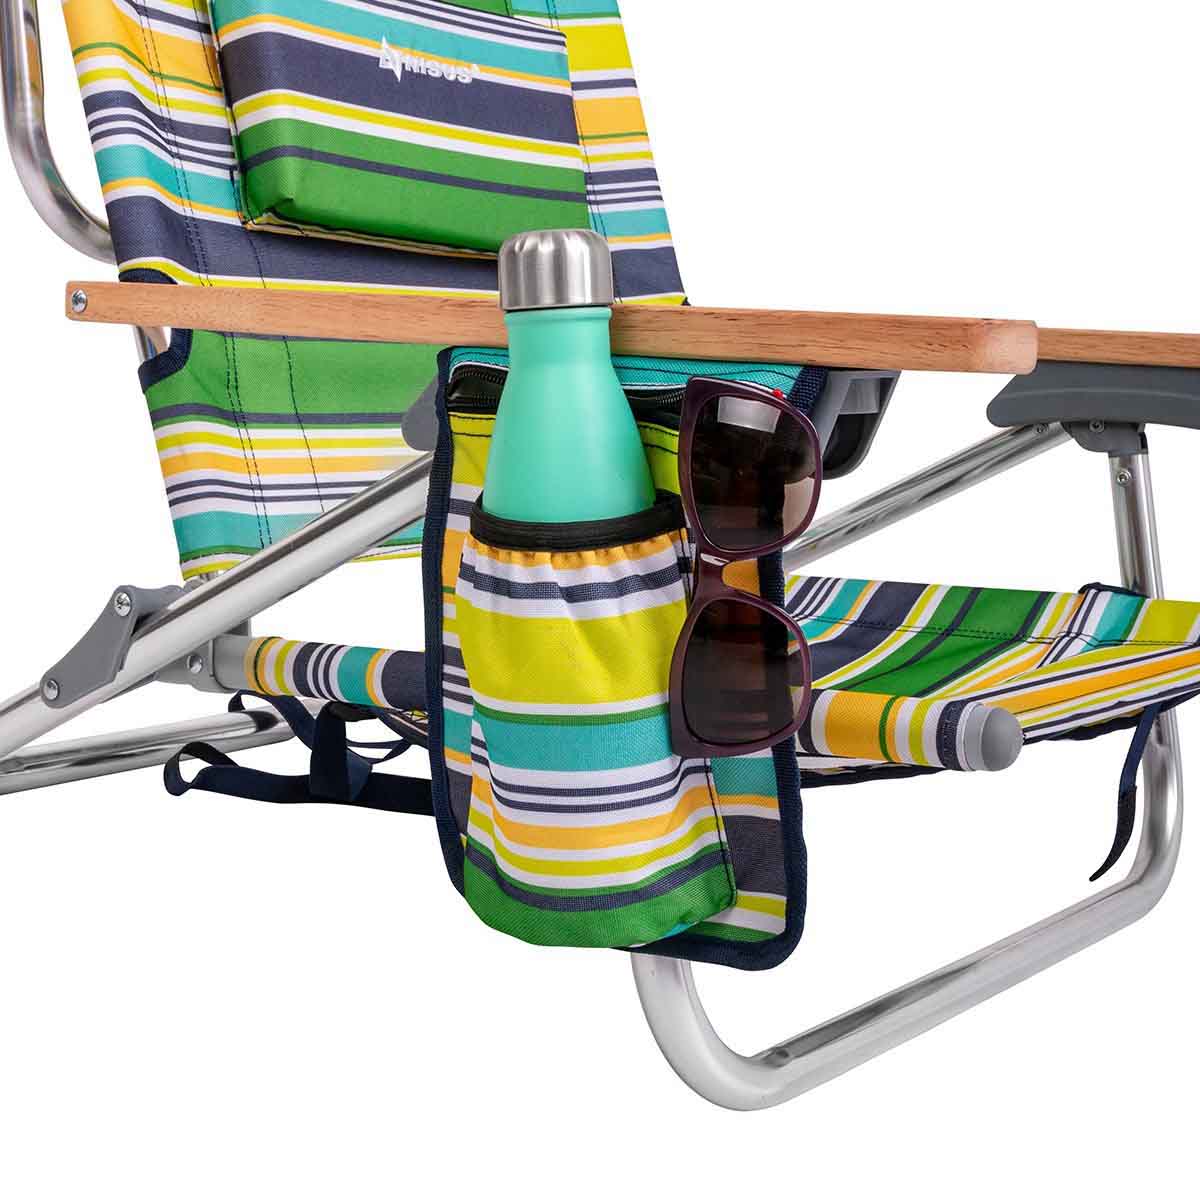 Backpack Beach Chair with Cup Holder featuring a pocket on the armrest to handle your belongings